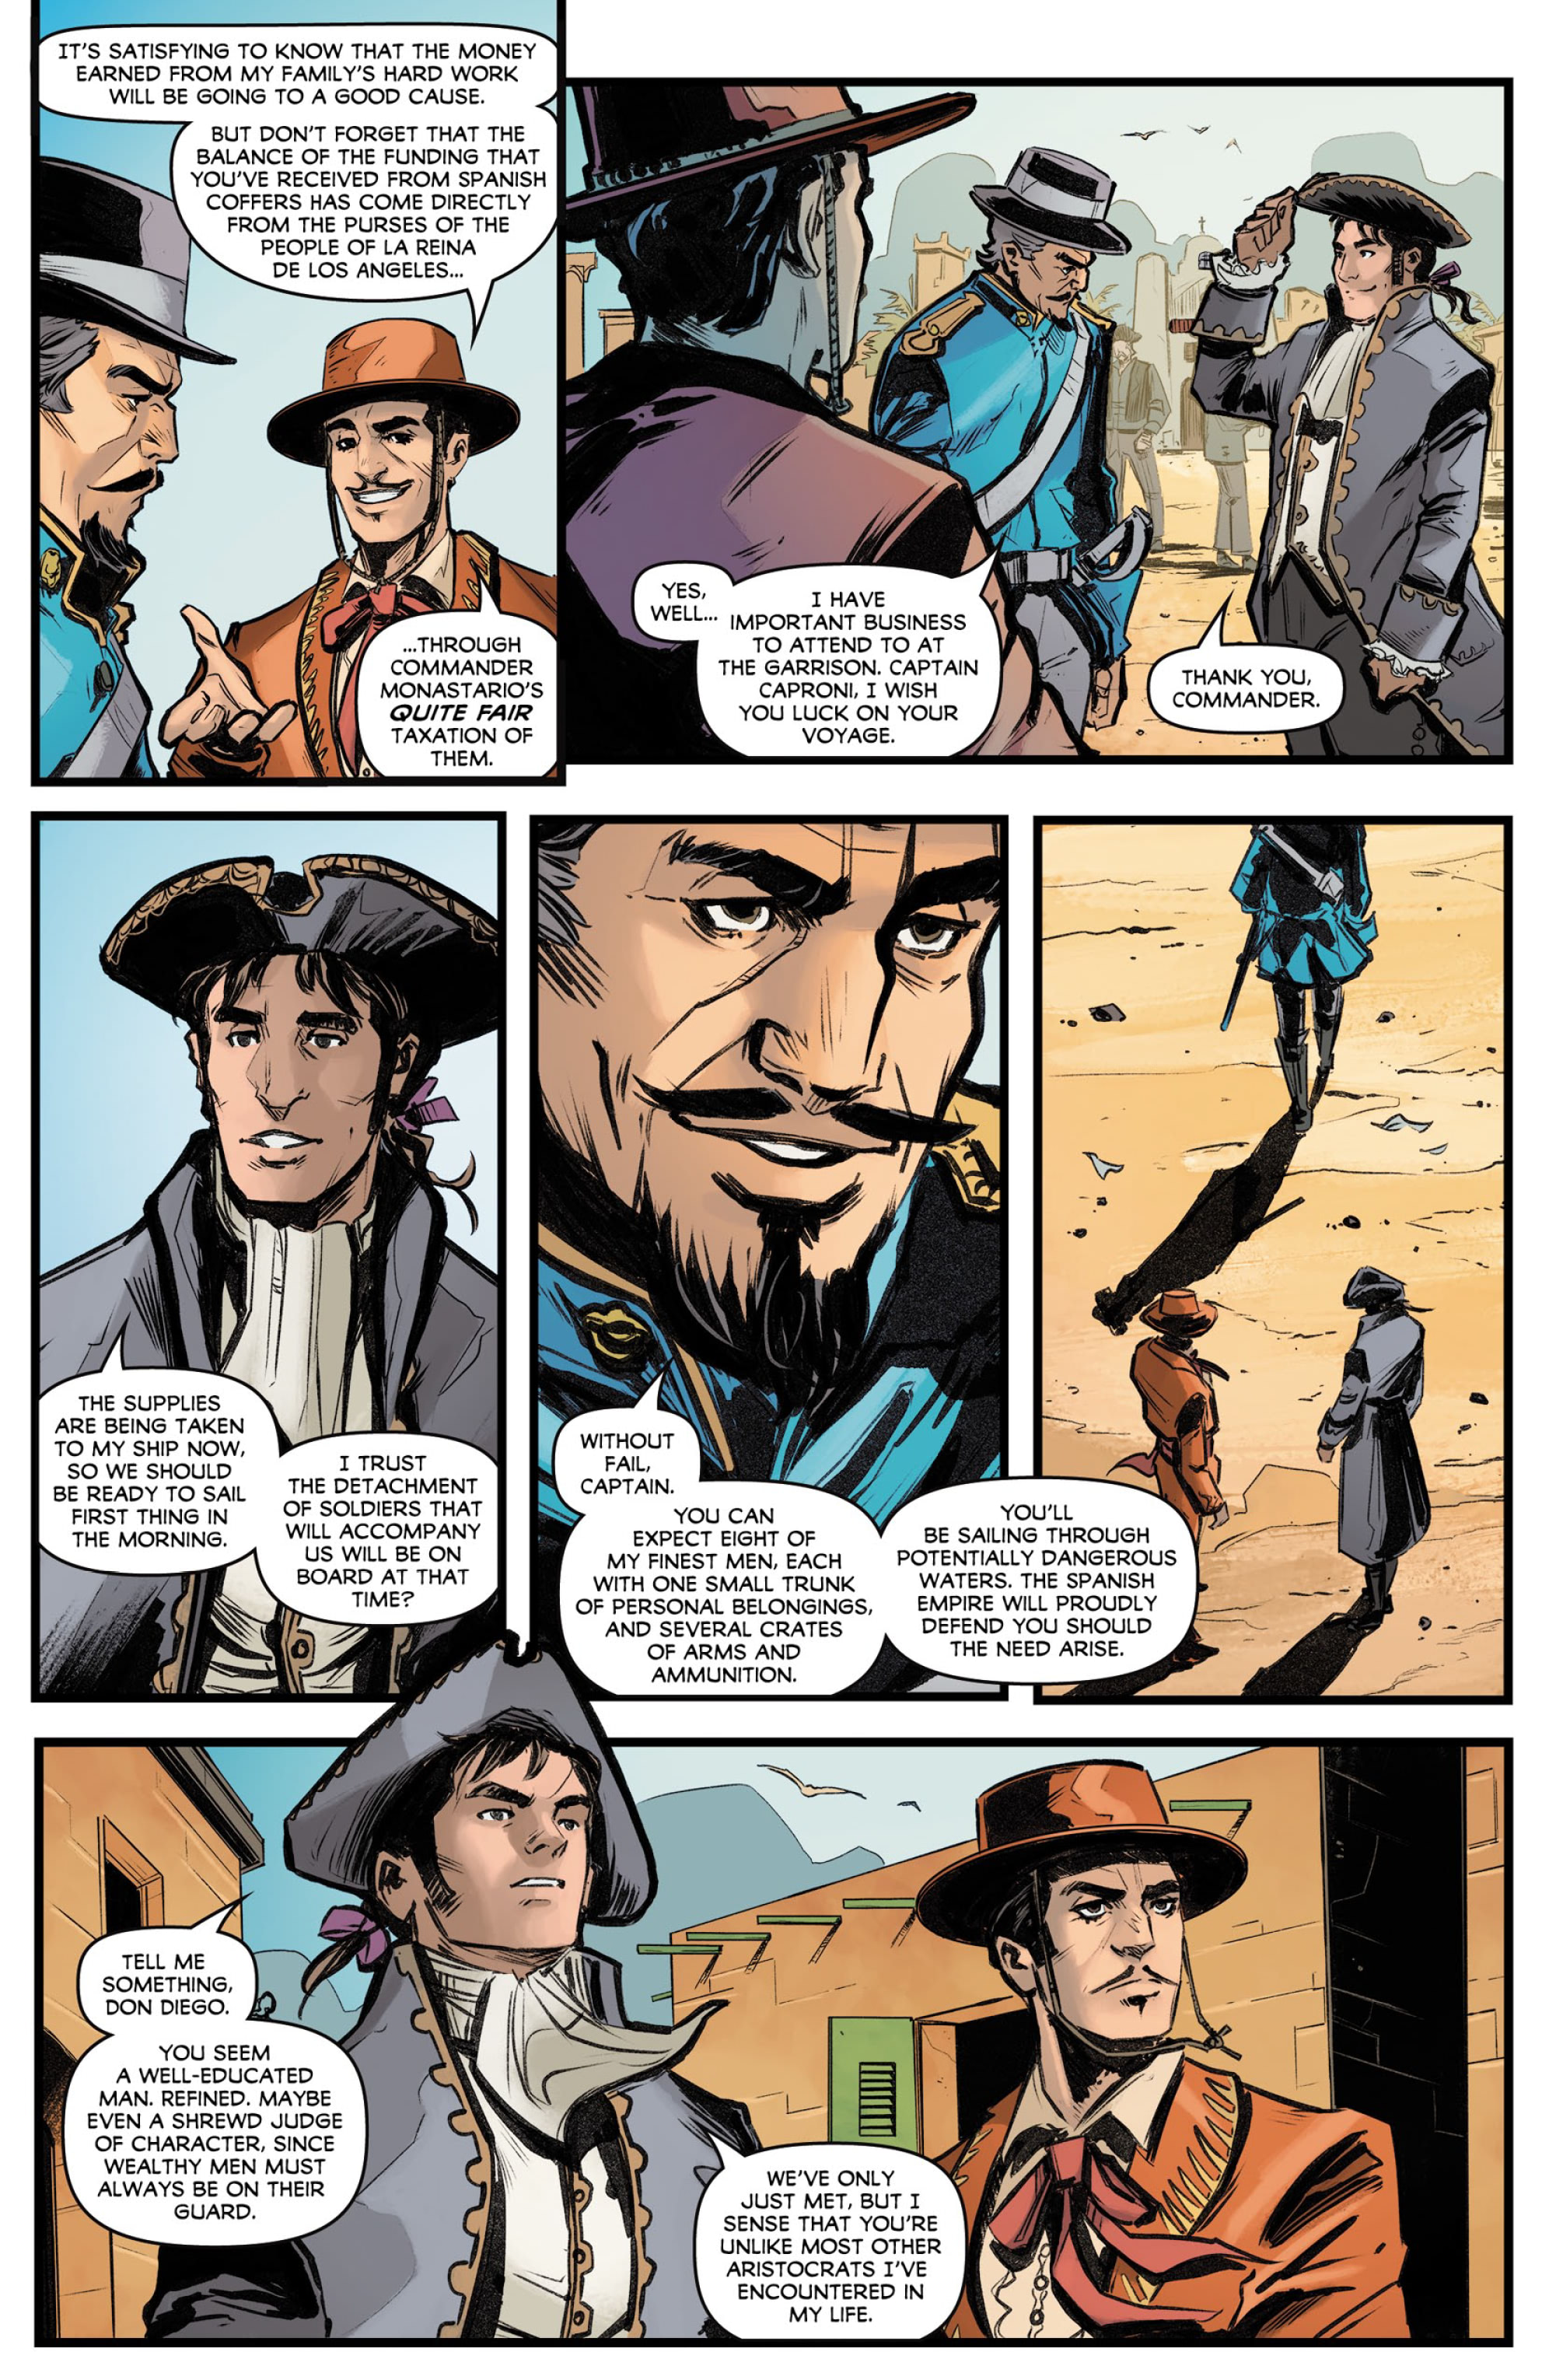 Zorro in the Land That Time Forgot (2020-): Chapter 1 - Page 4